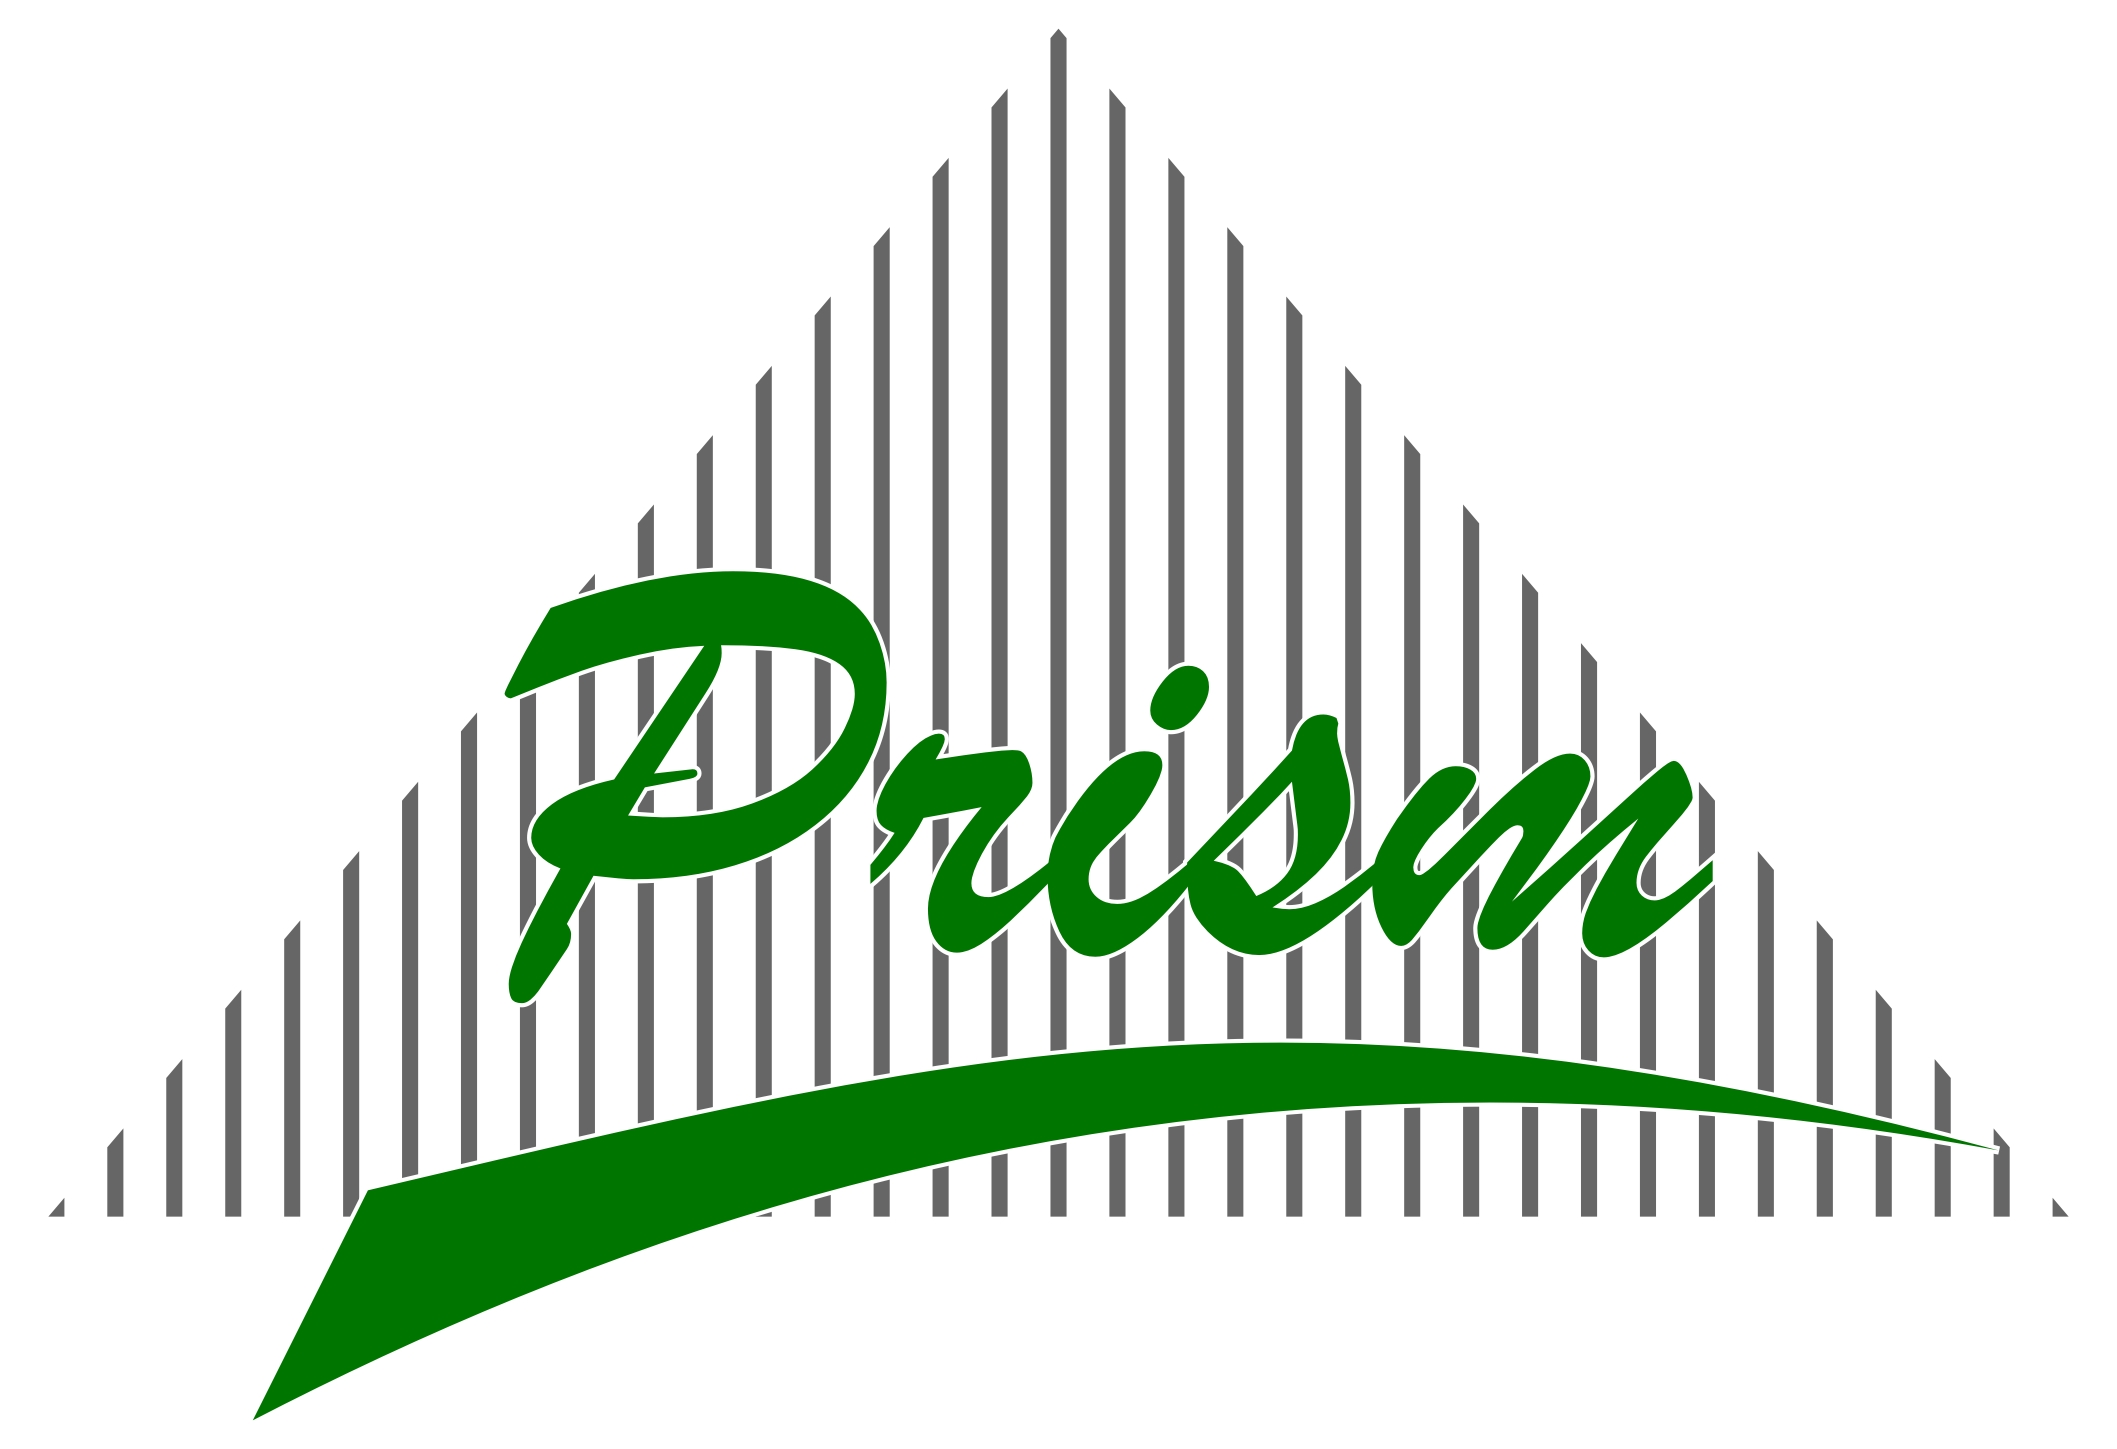 Prism Industries Private Limited